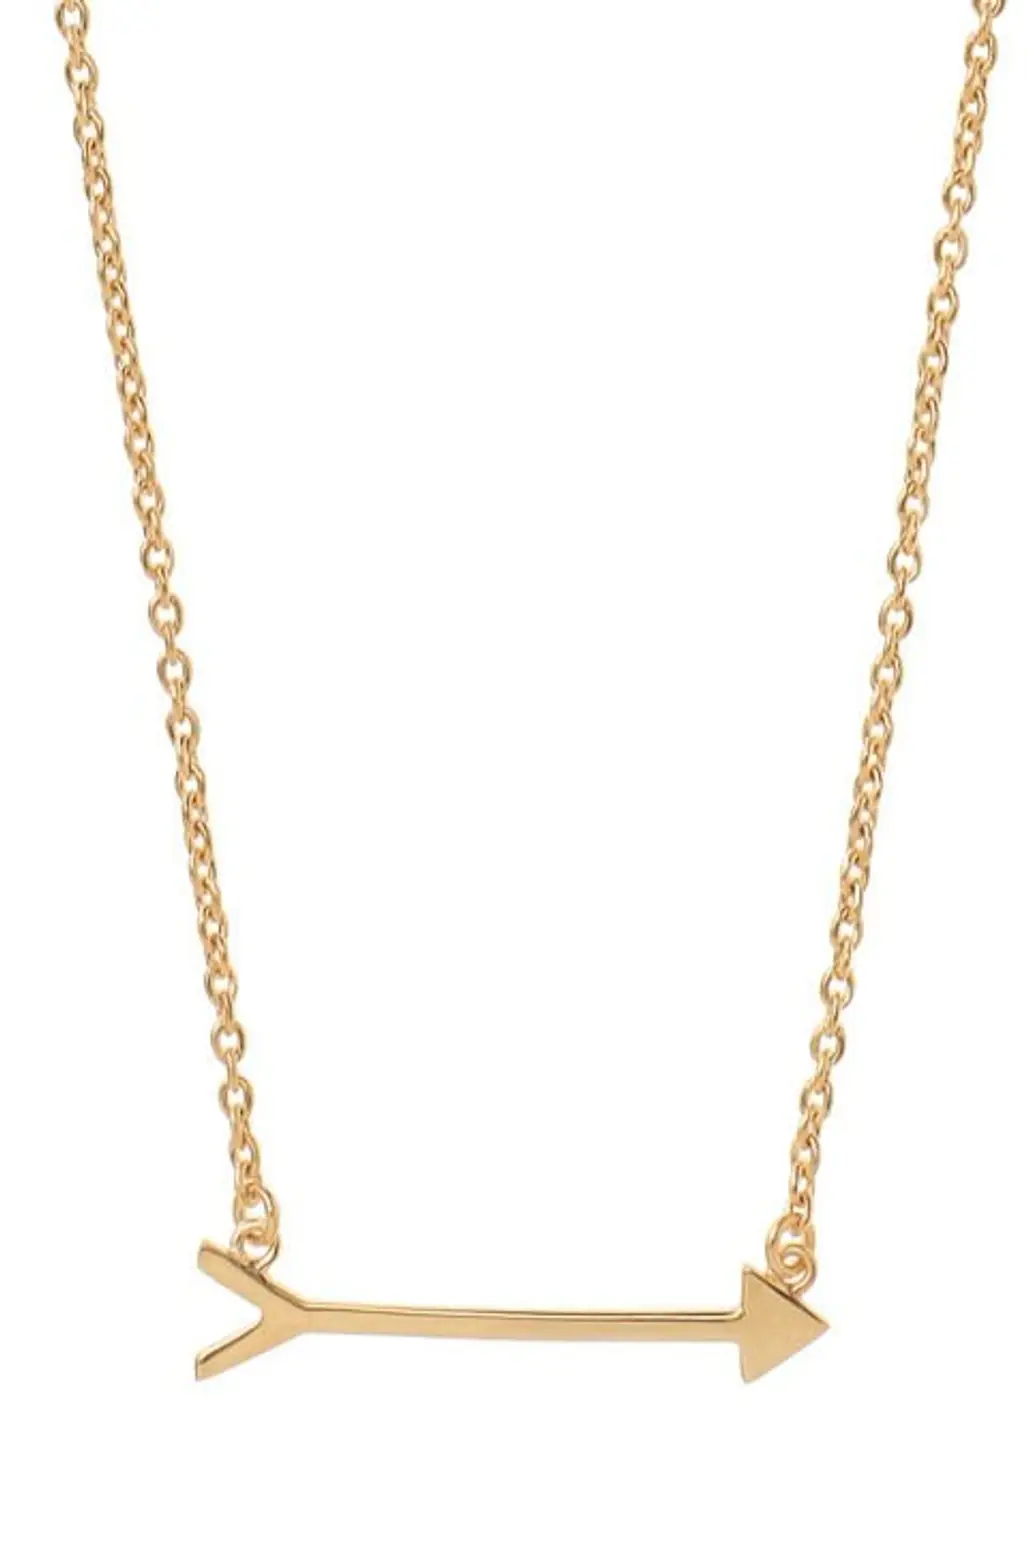 necklace, jewellery, chain, fashion accessory, gold,